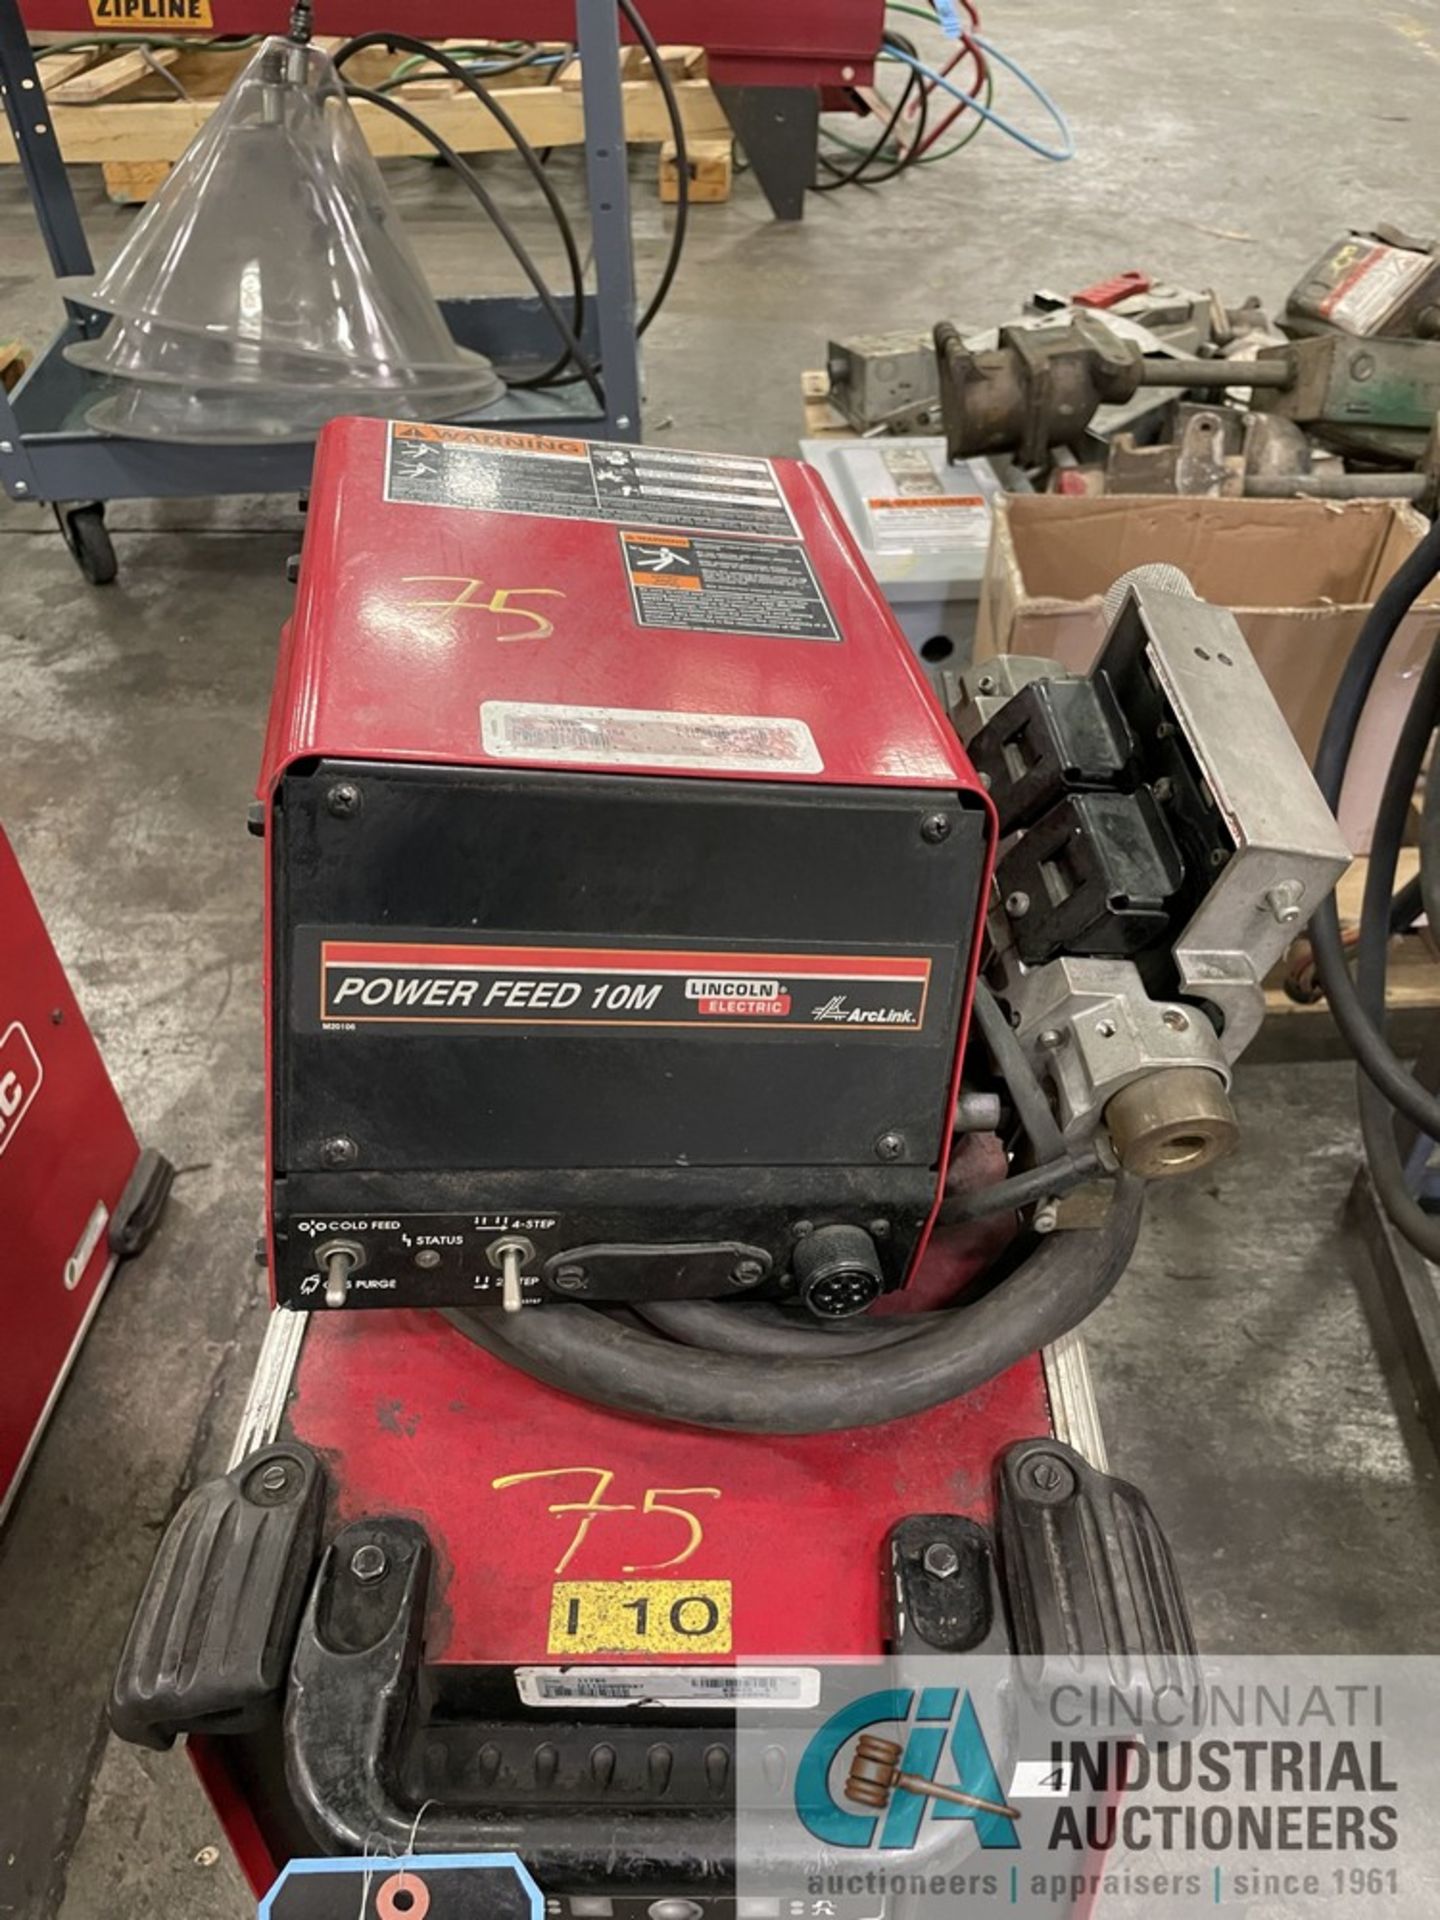 350 AMP LINCOLN S350 POWER WAVE ADVANCED PROCESS WELDER S/N U1130809387 WITH POWER FEED 10M WIRE - Image 4 of 5